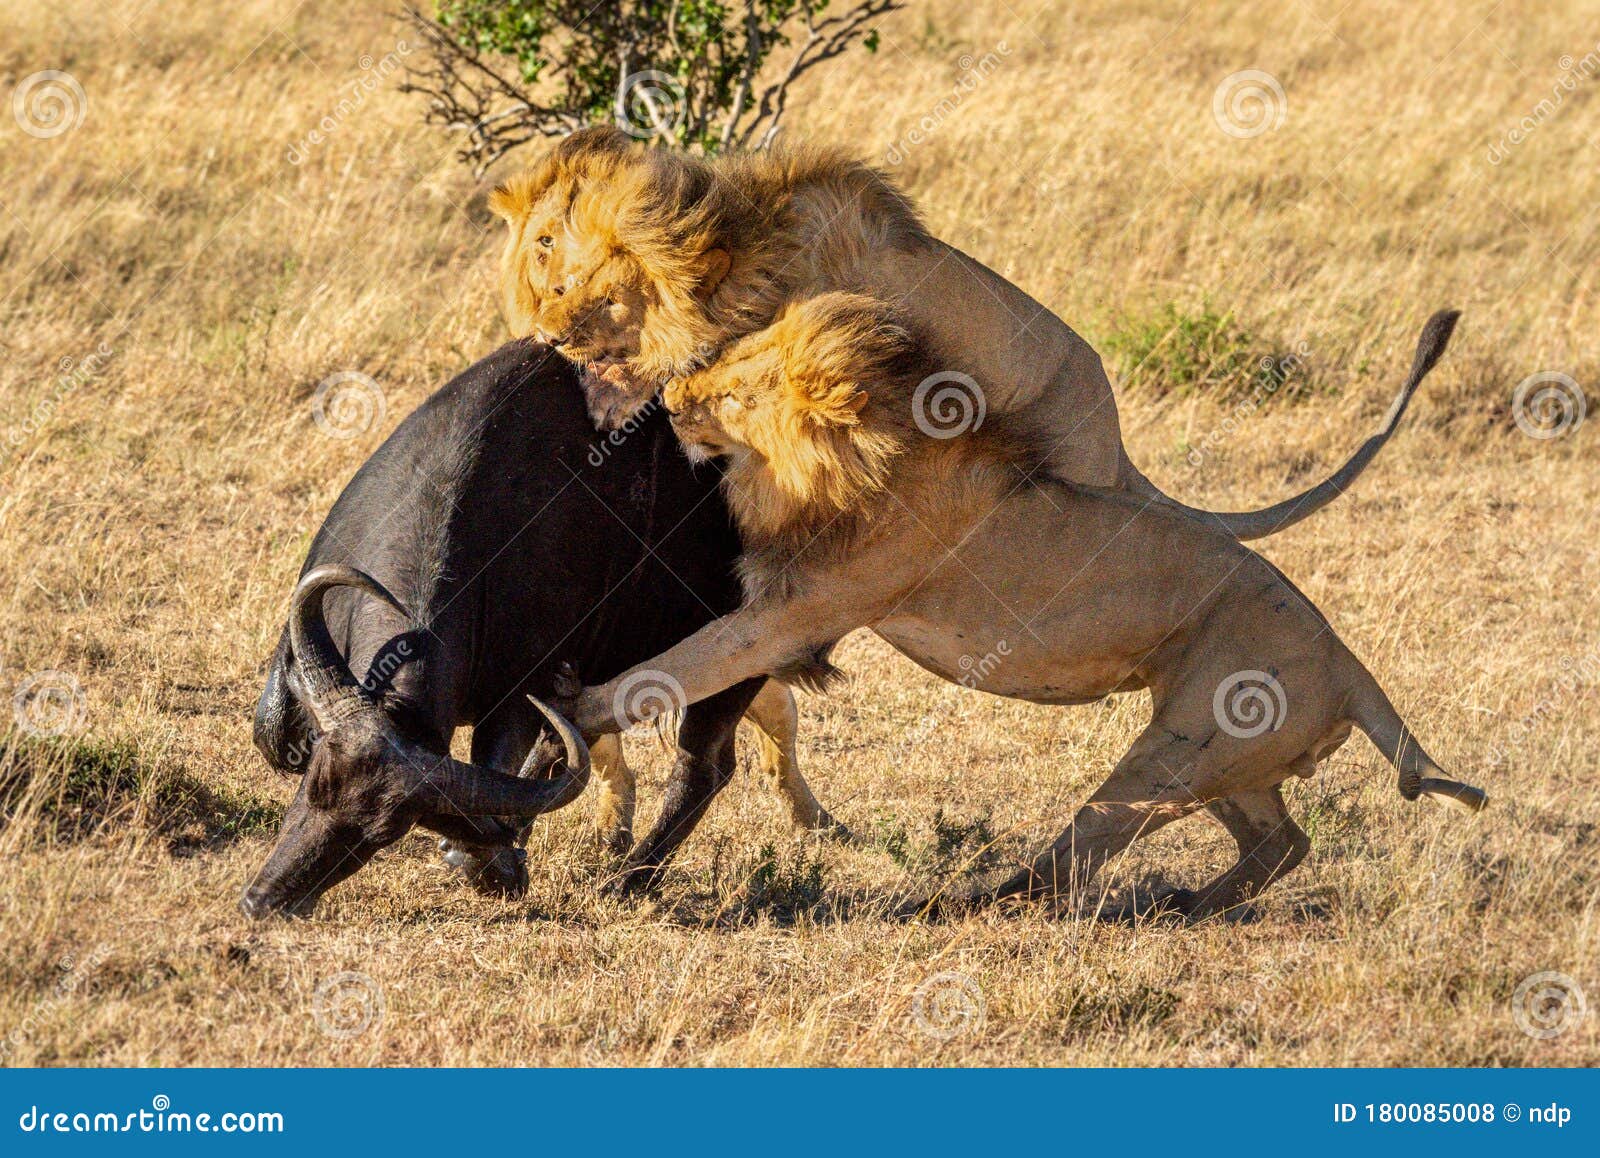 Three Male Lion Attack Buffalo from Behind Photo - Image of outside, african: 180085008